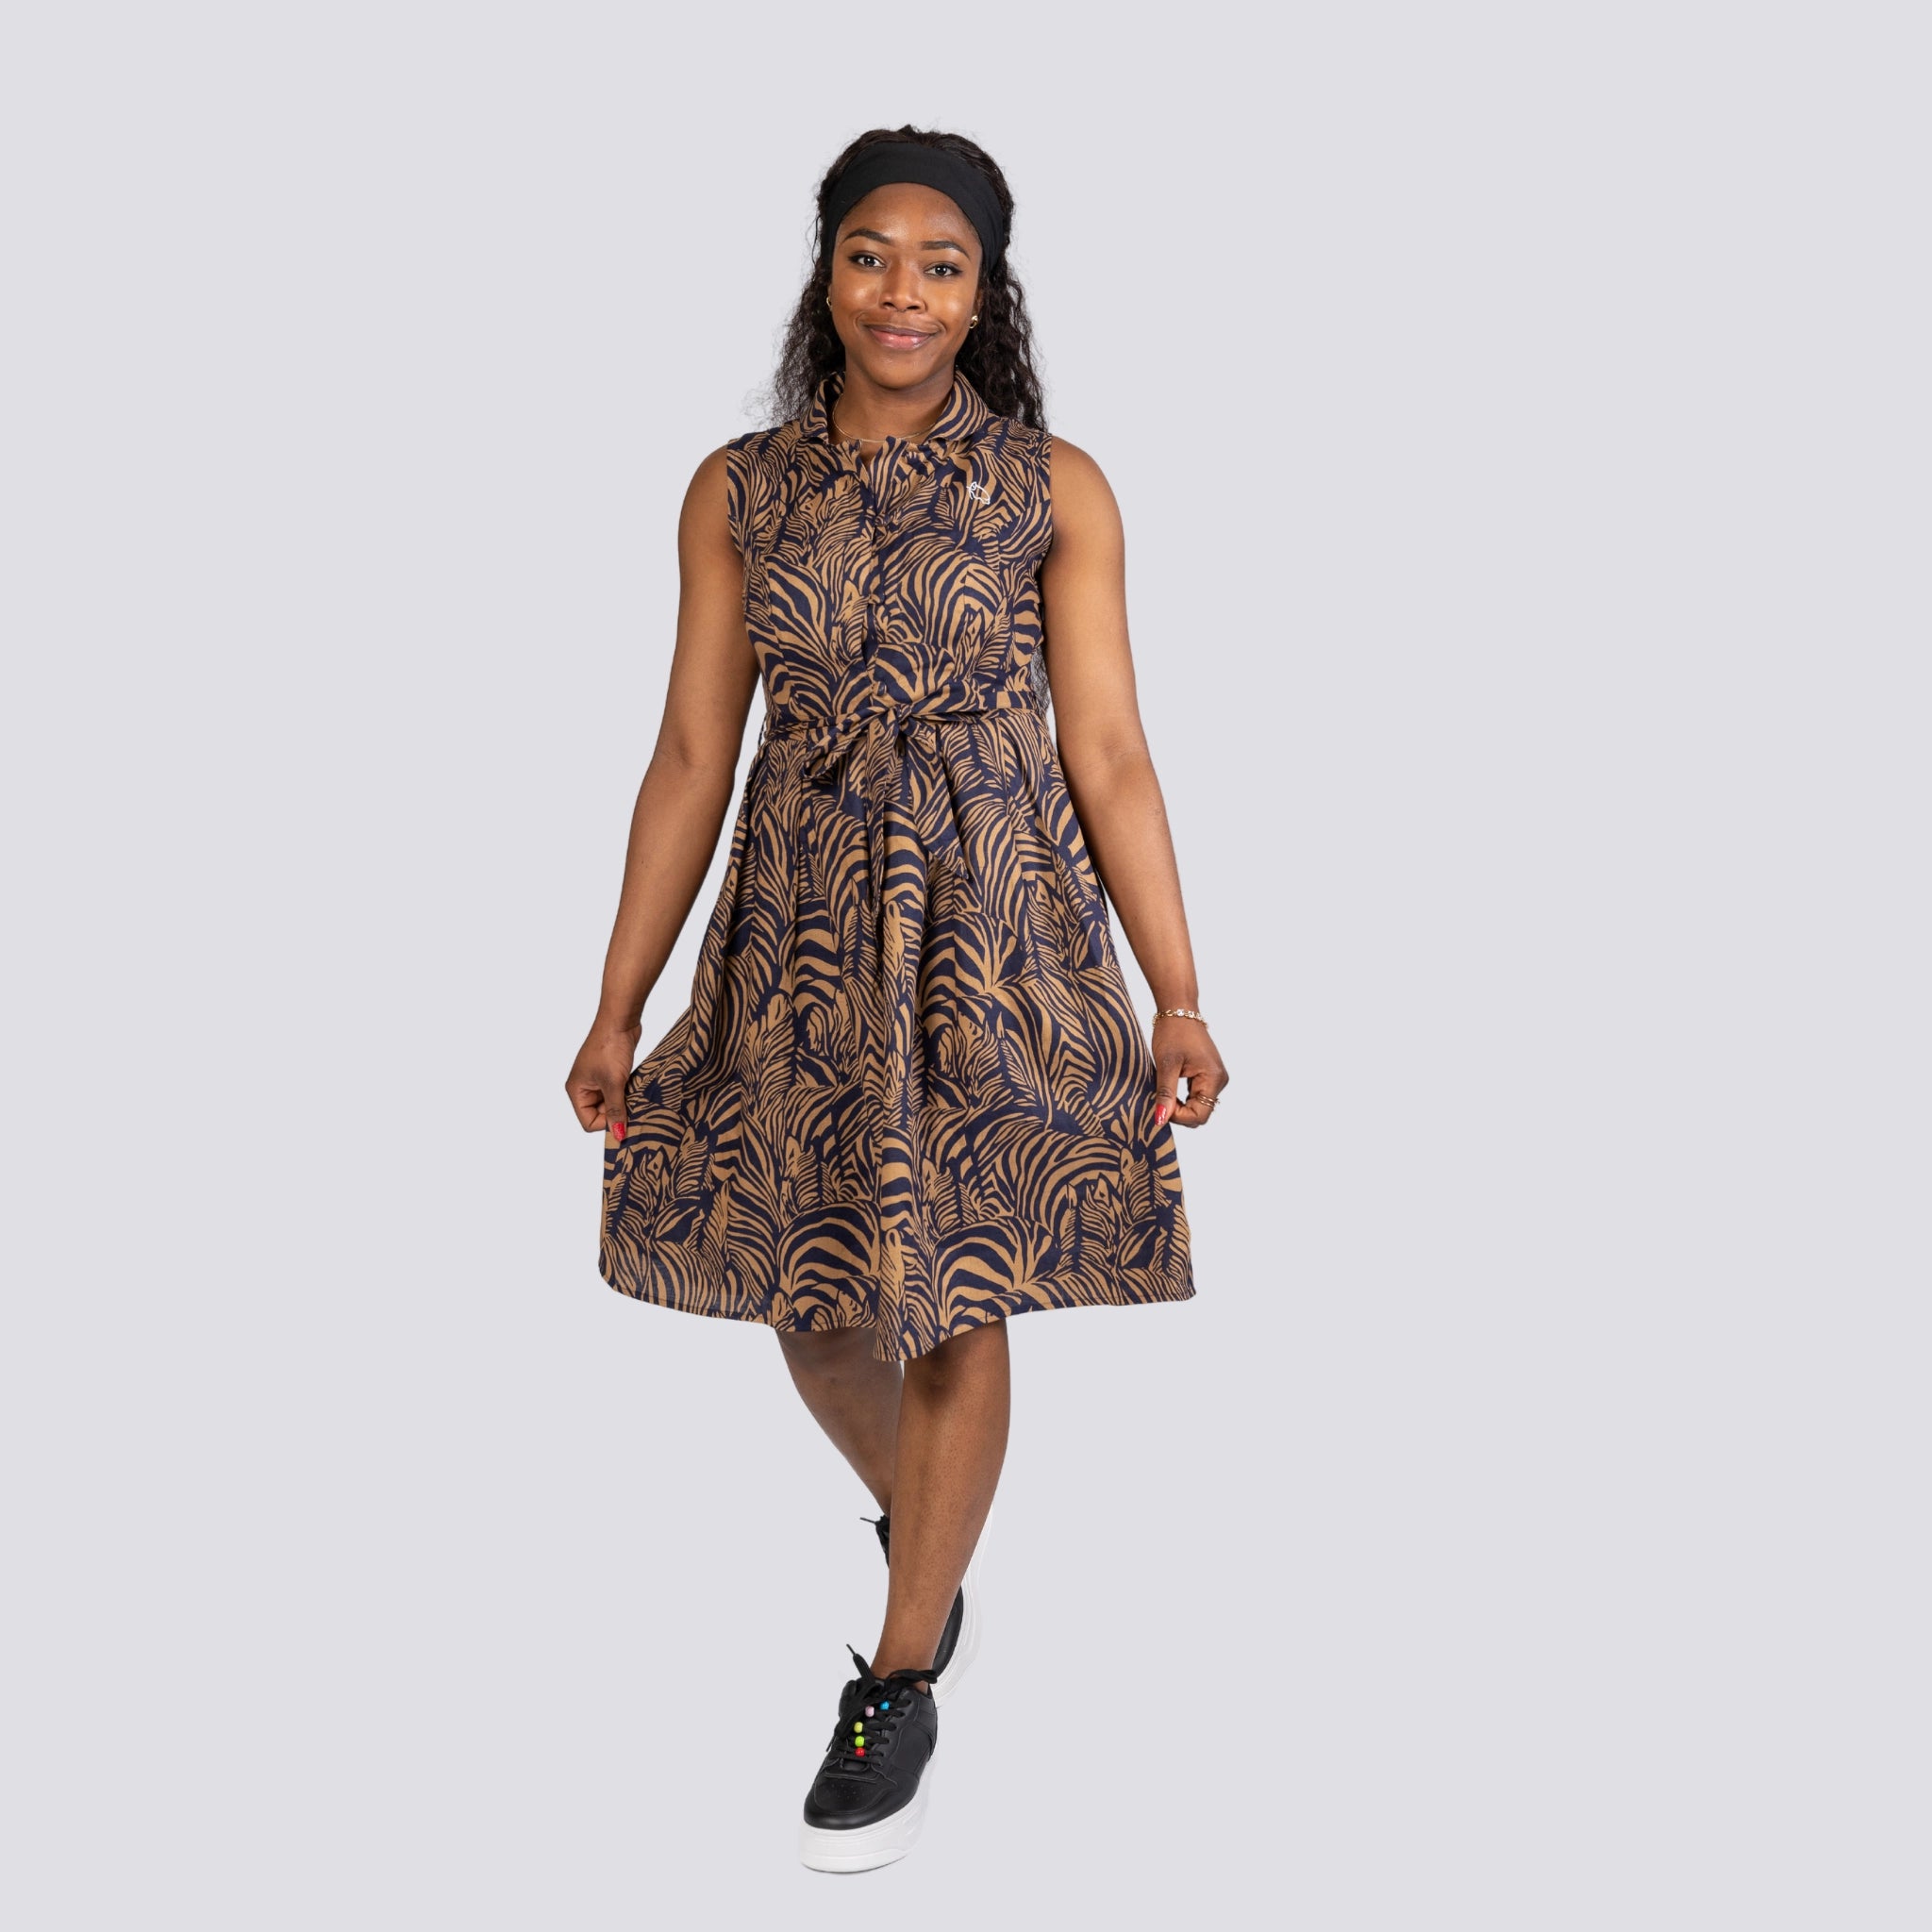 A woman in a navy blue patterned Linen Enchantment Button-Up Midi Dress by Karee, smiling and standing against a light grey background, wearing sneakers.